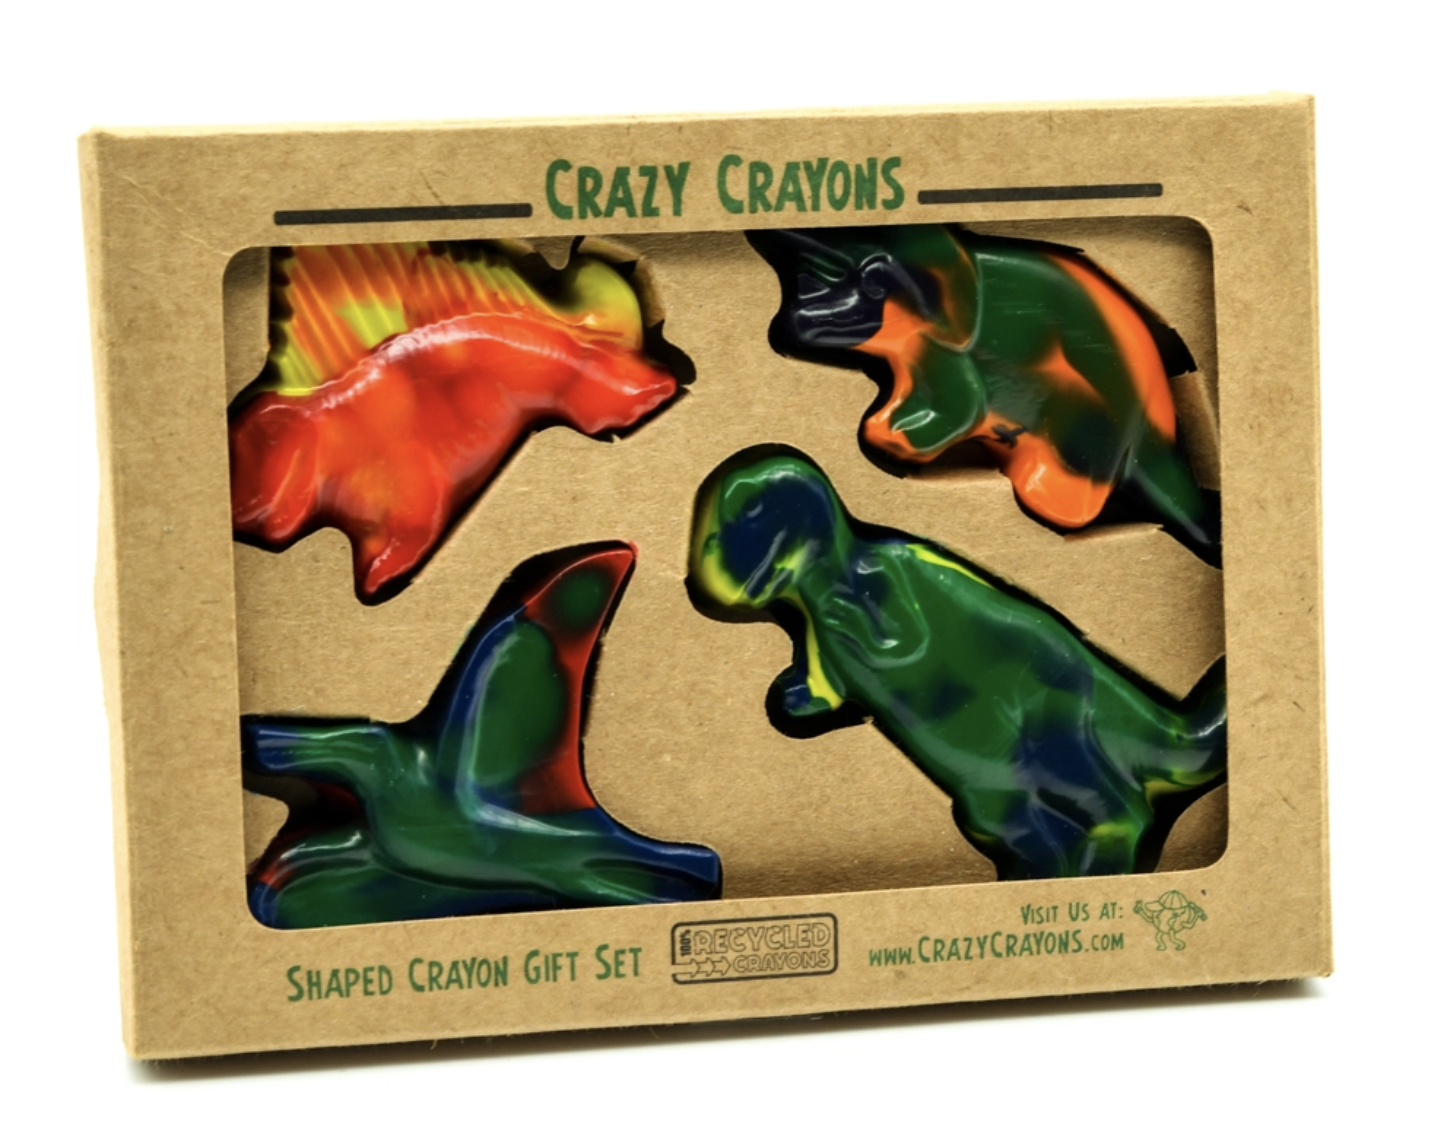 Dinosaur Crayons - Mines Museum of Earth Science